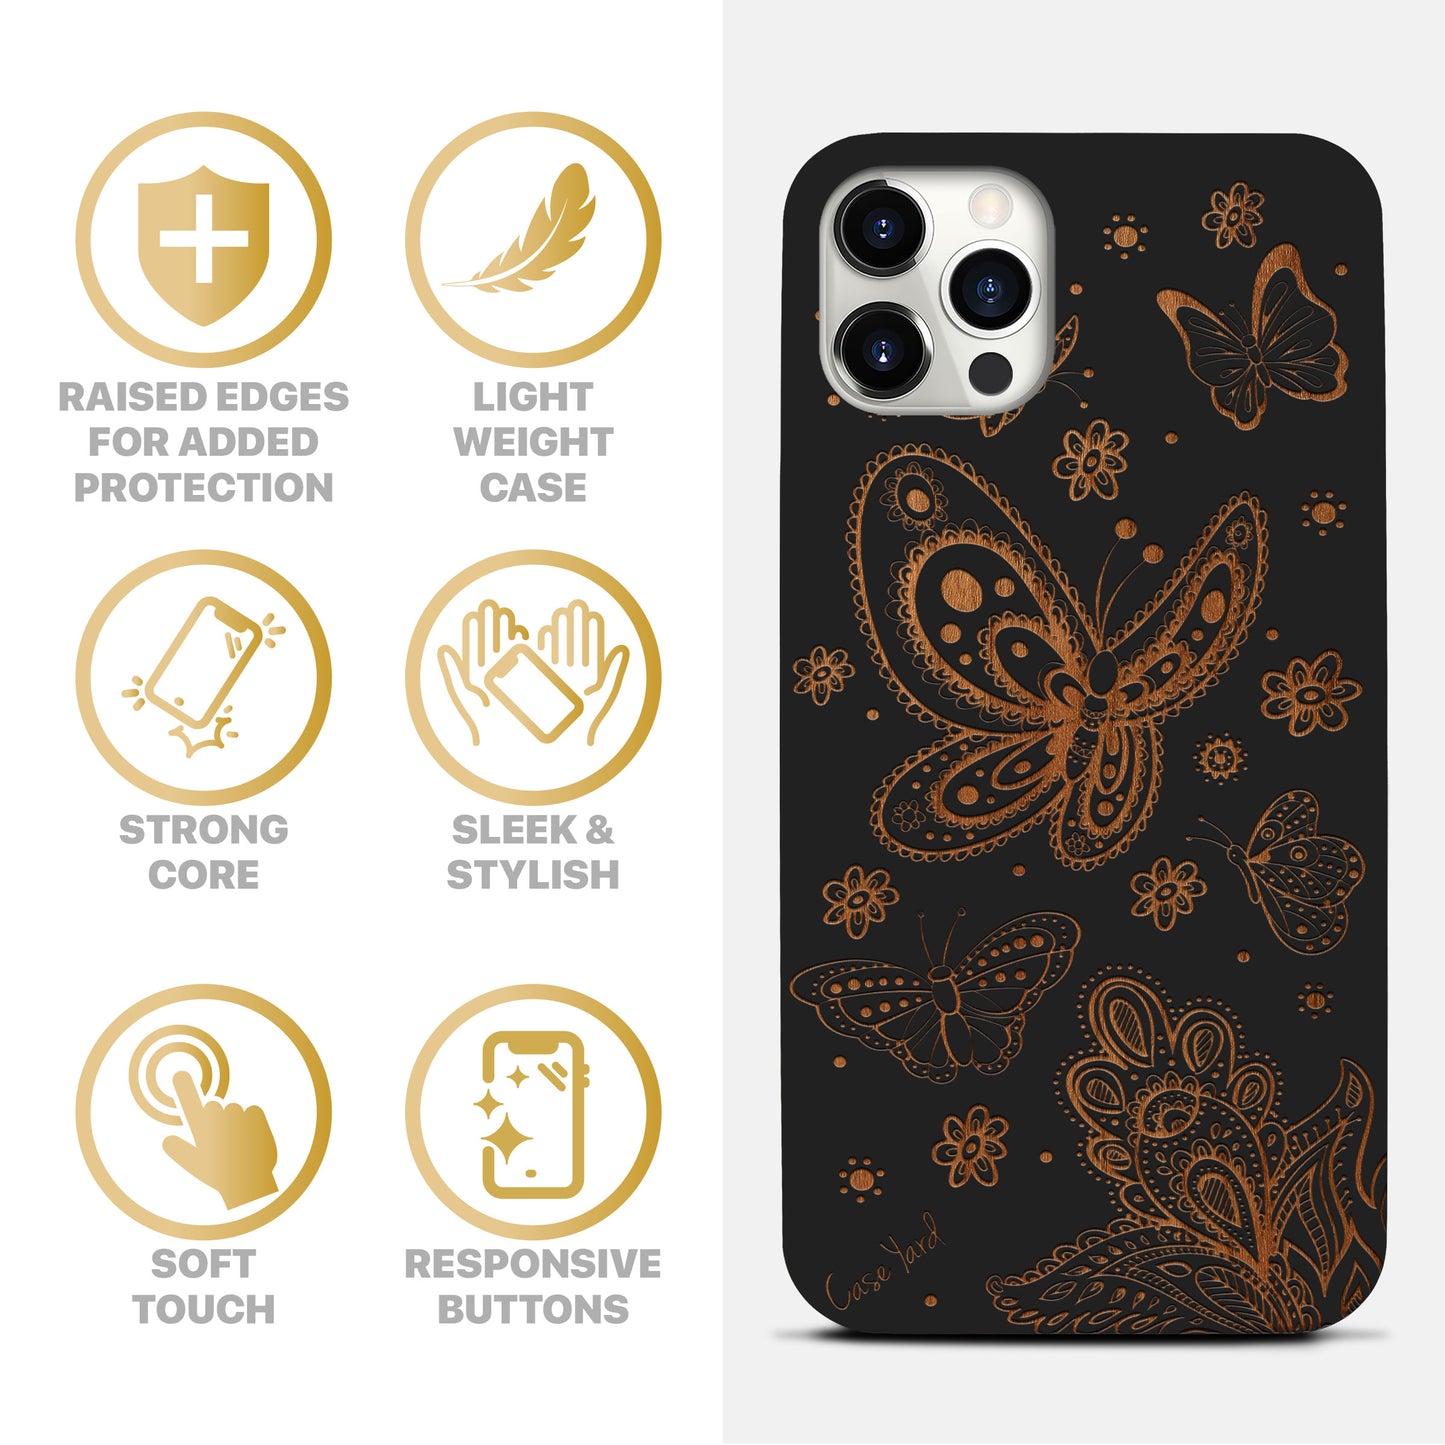 Wooden Cell Phone Case Cover, Laser Engraved case for iPhone & Samsung phone Butterflies Design